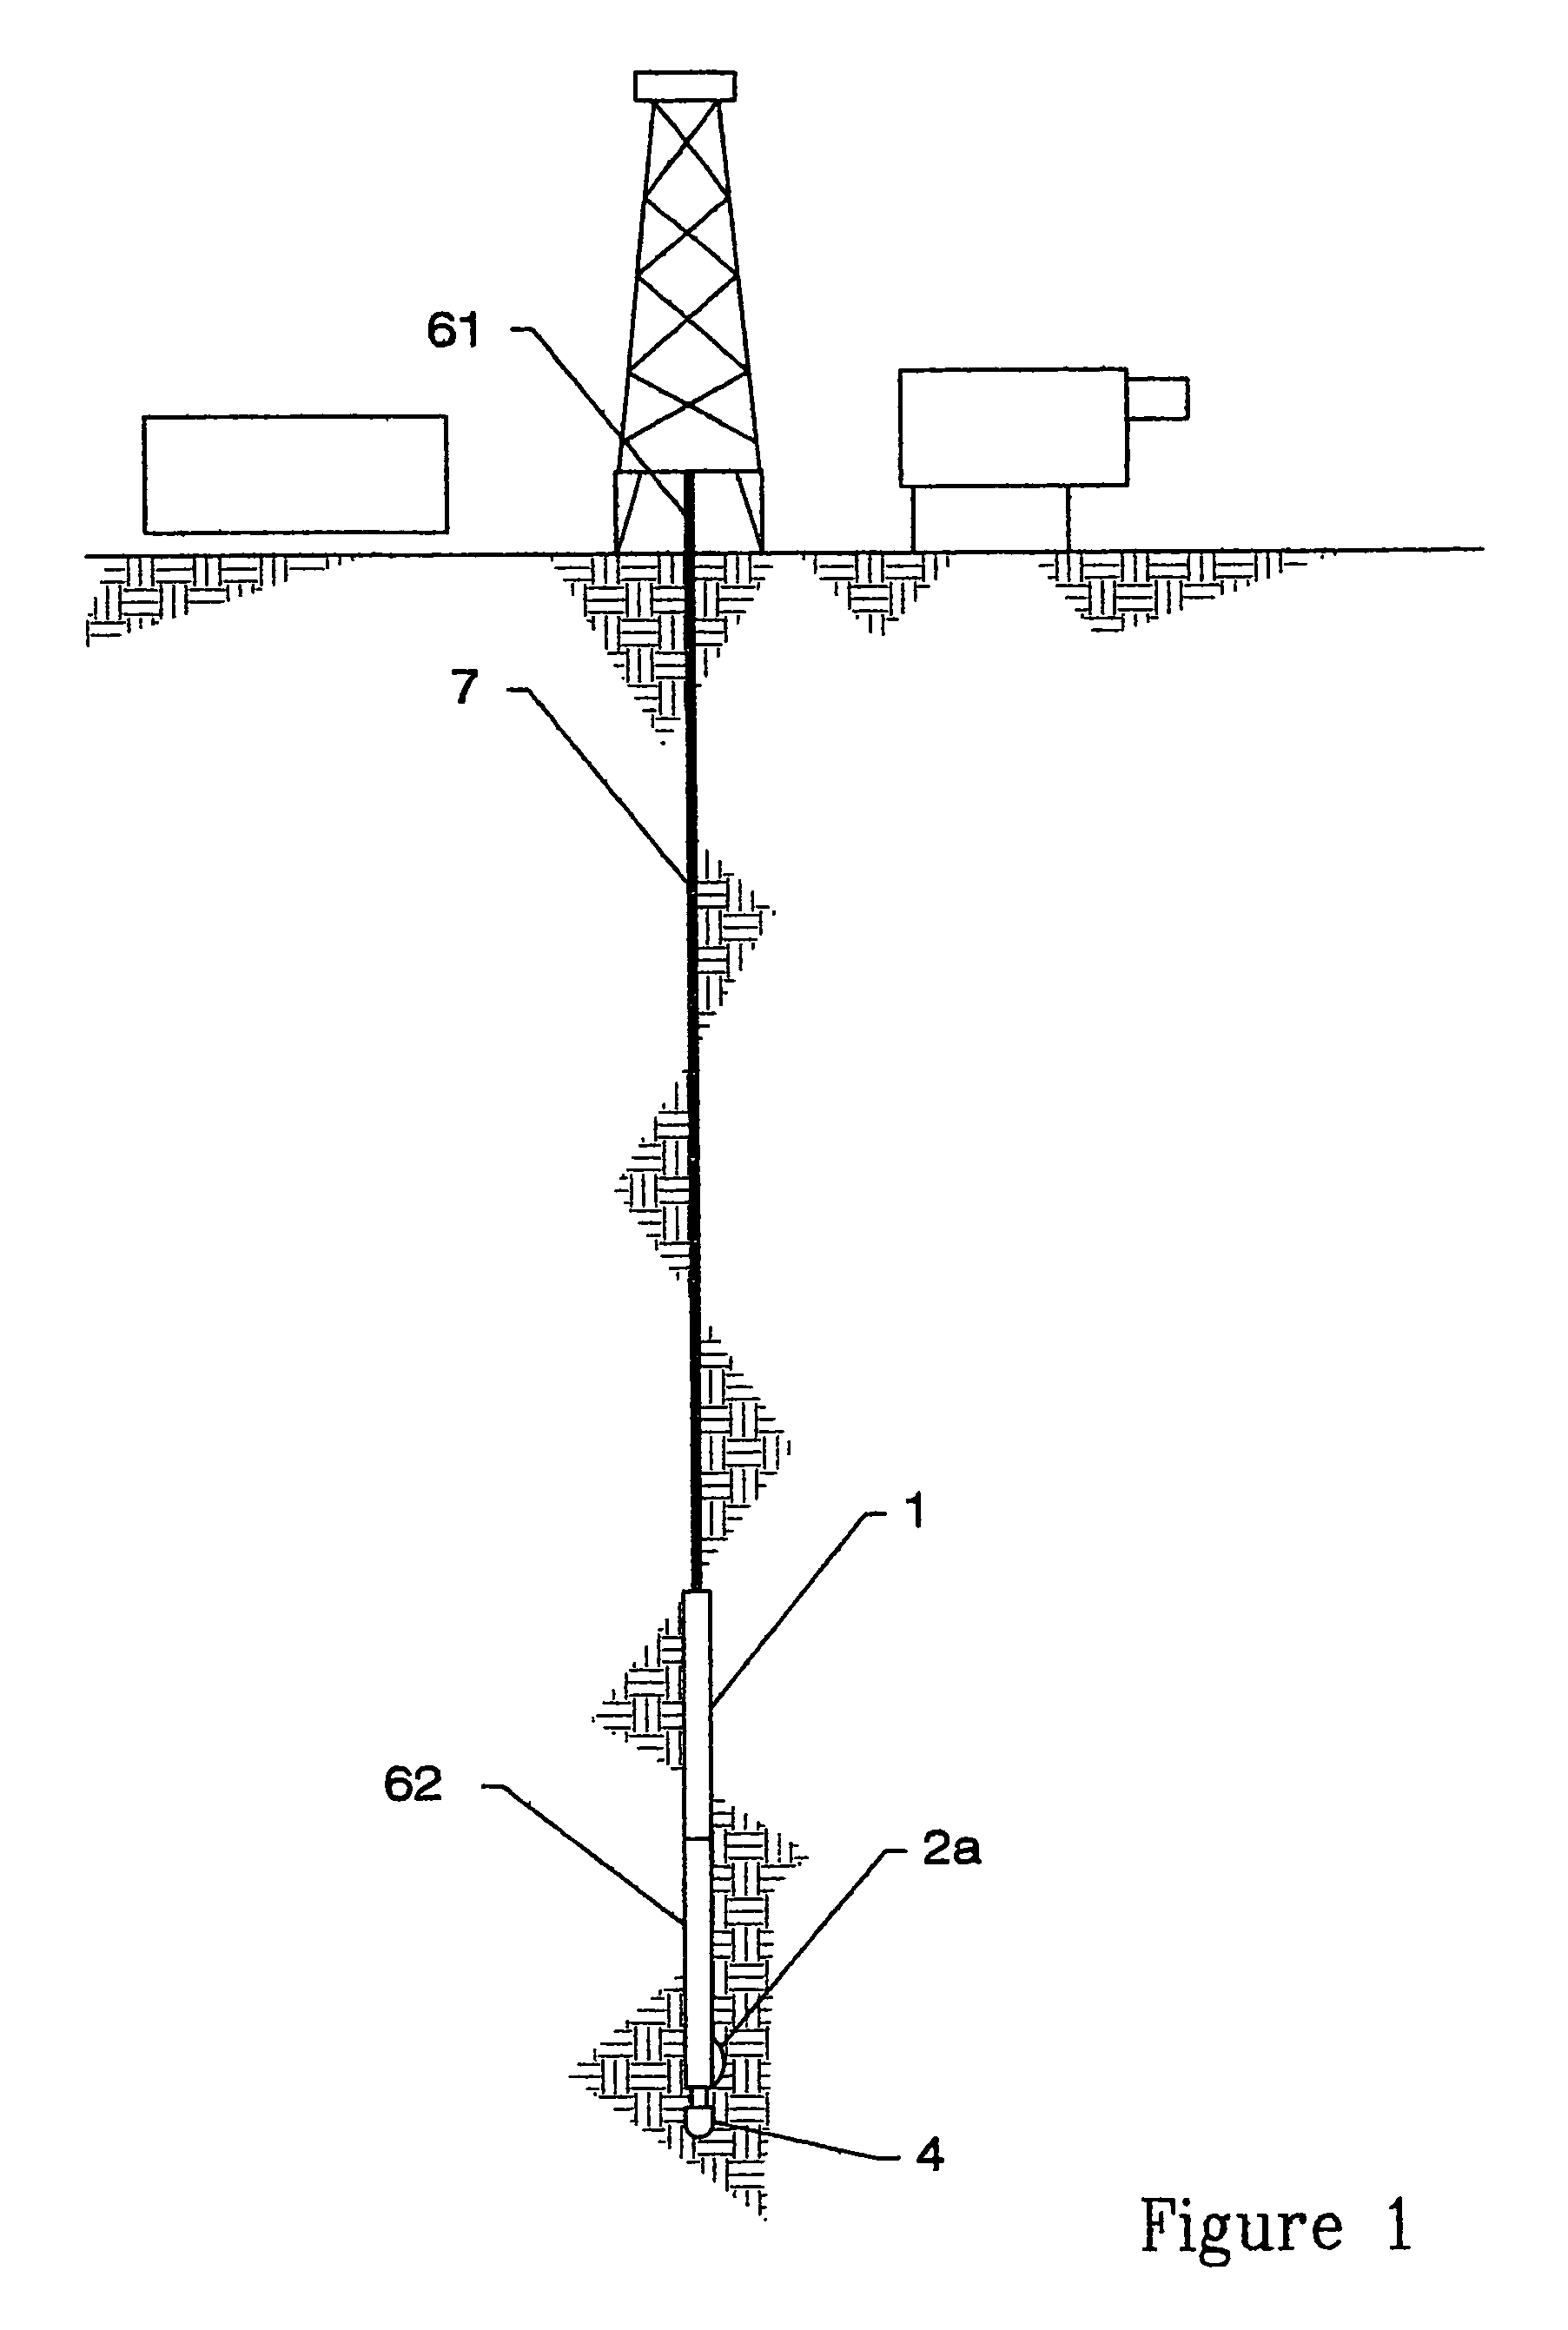 Downhole pilot bit and reamer with maximized mud motor dimensions